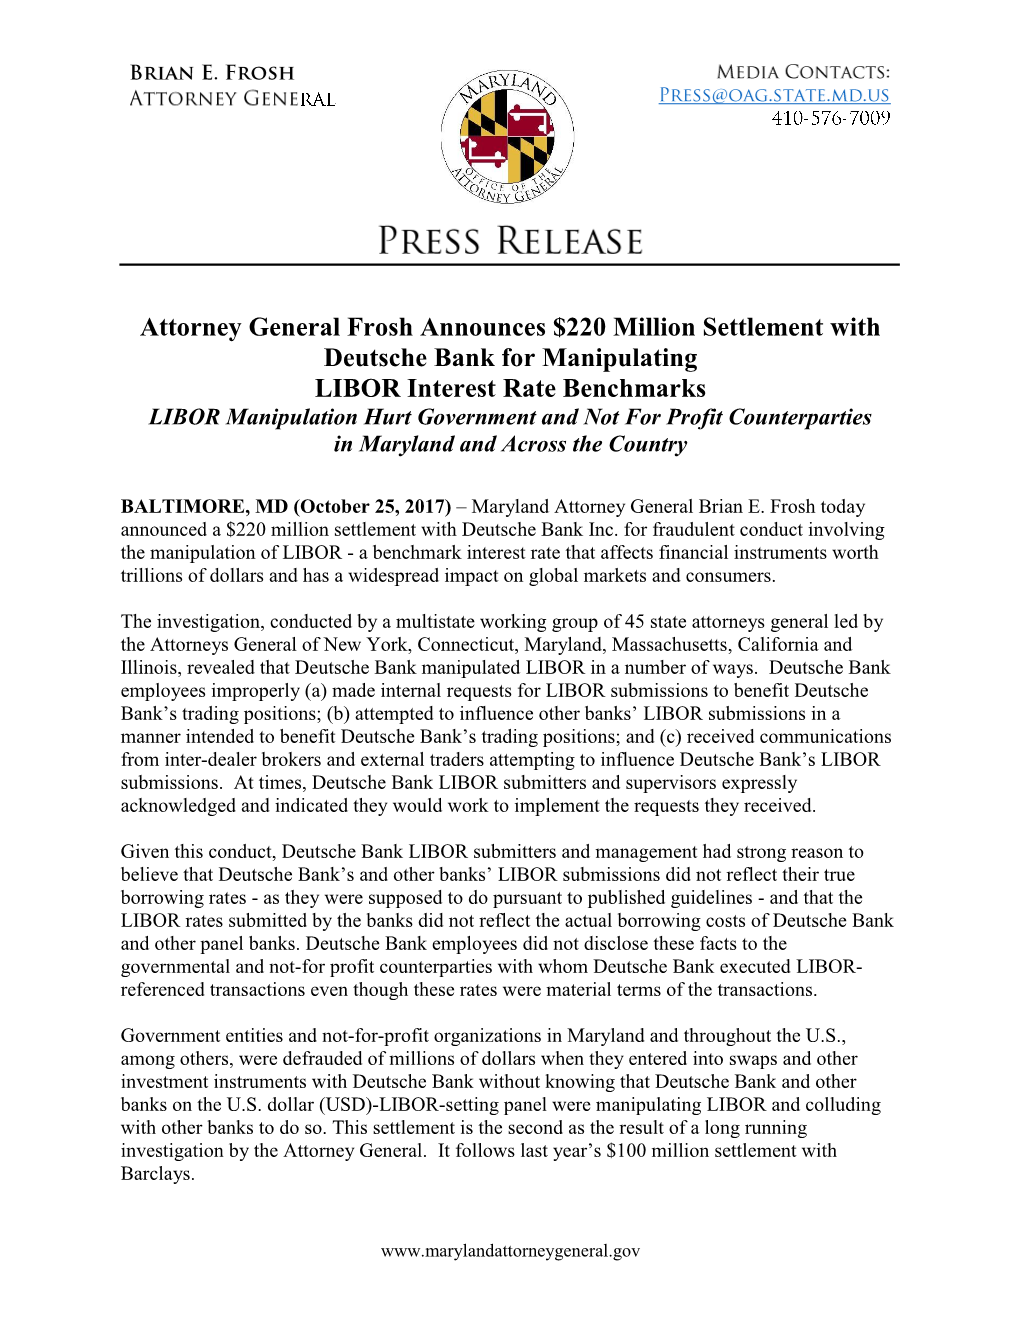 Attorney General Frosh Announces $220 Million Settlement With